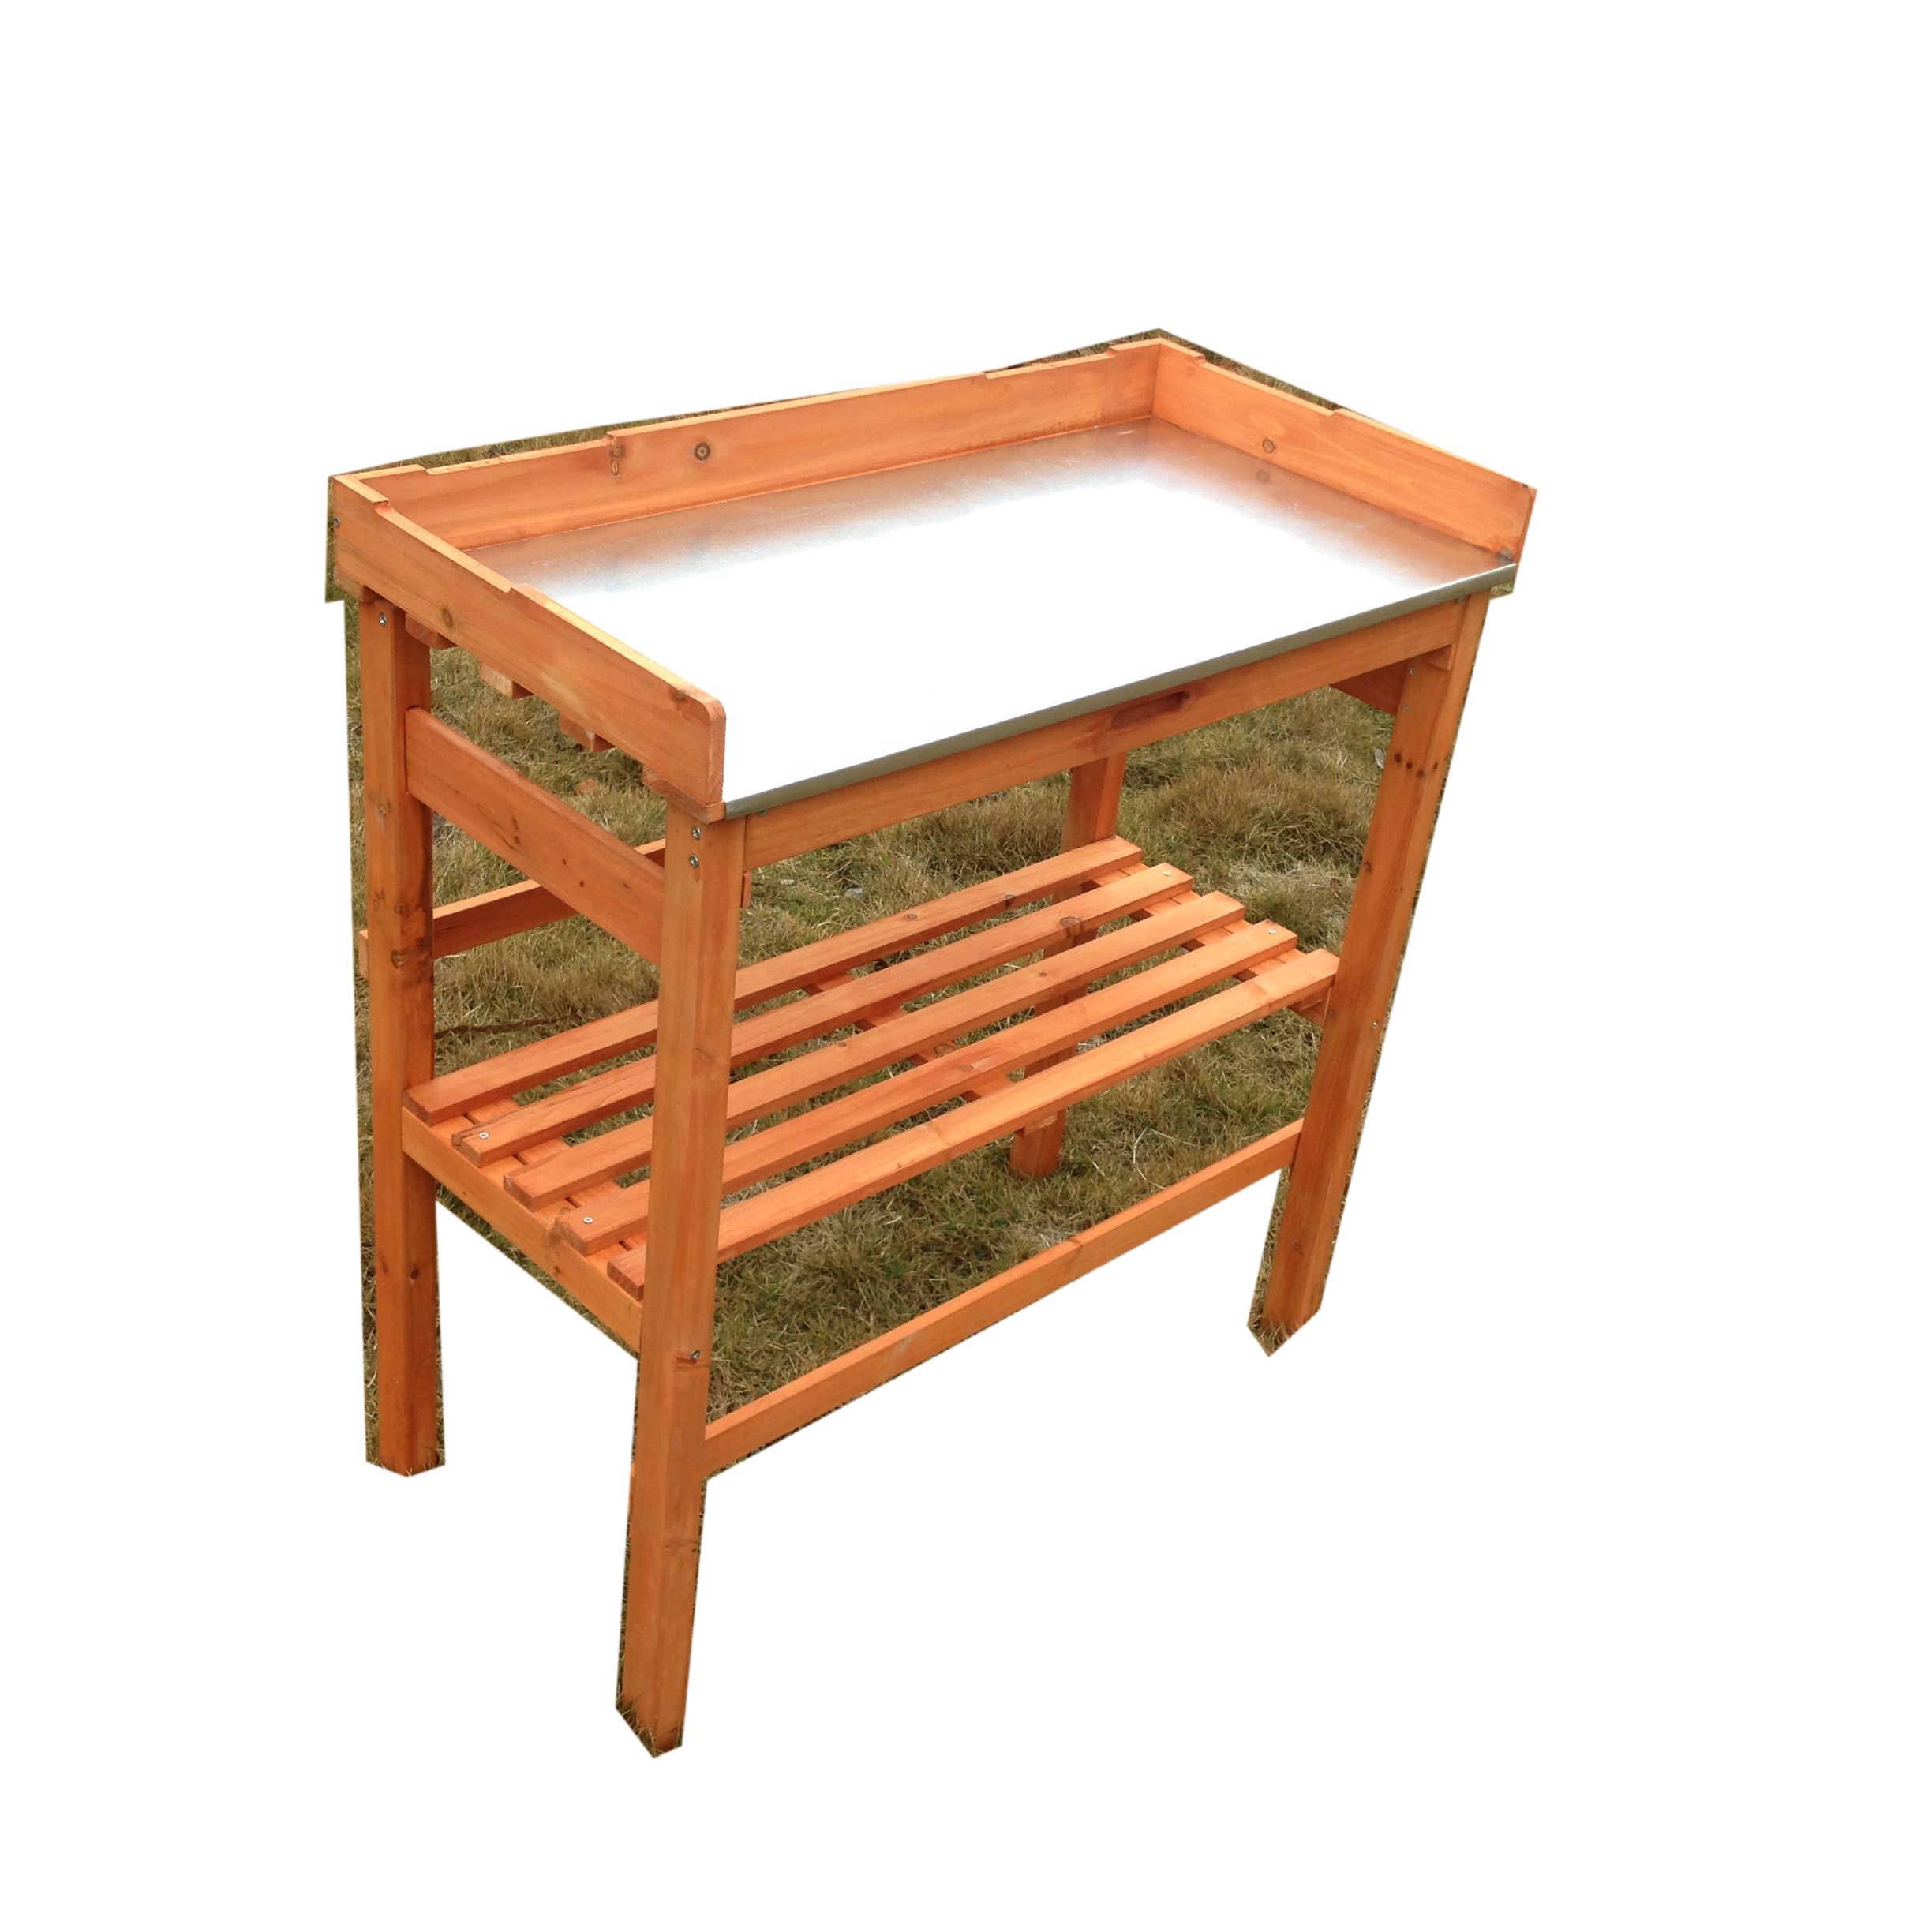 Hot selling cheap price outdoor garden planter wooden potting plant table